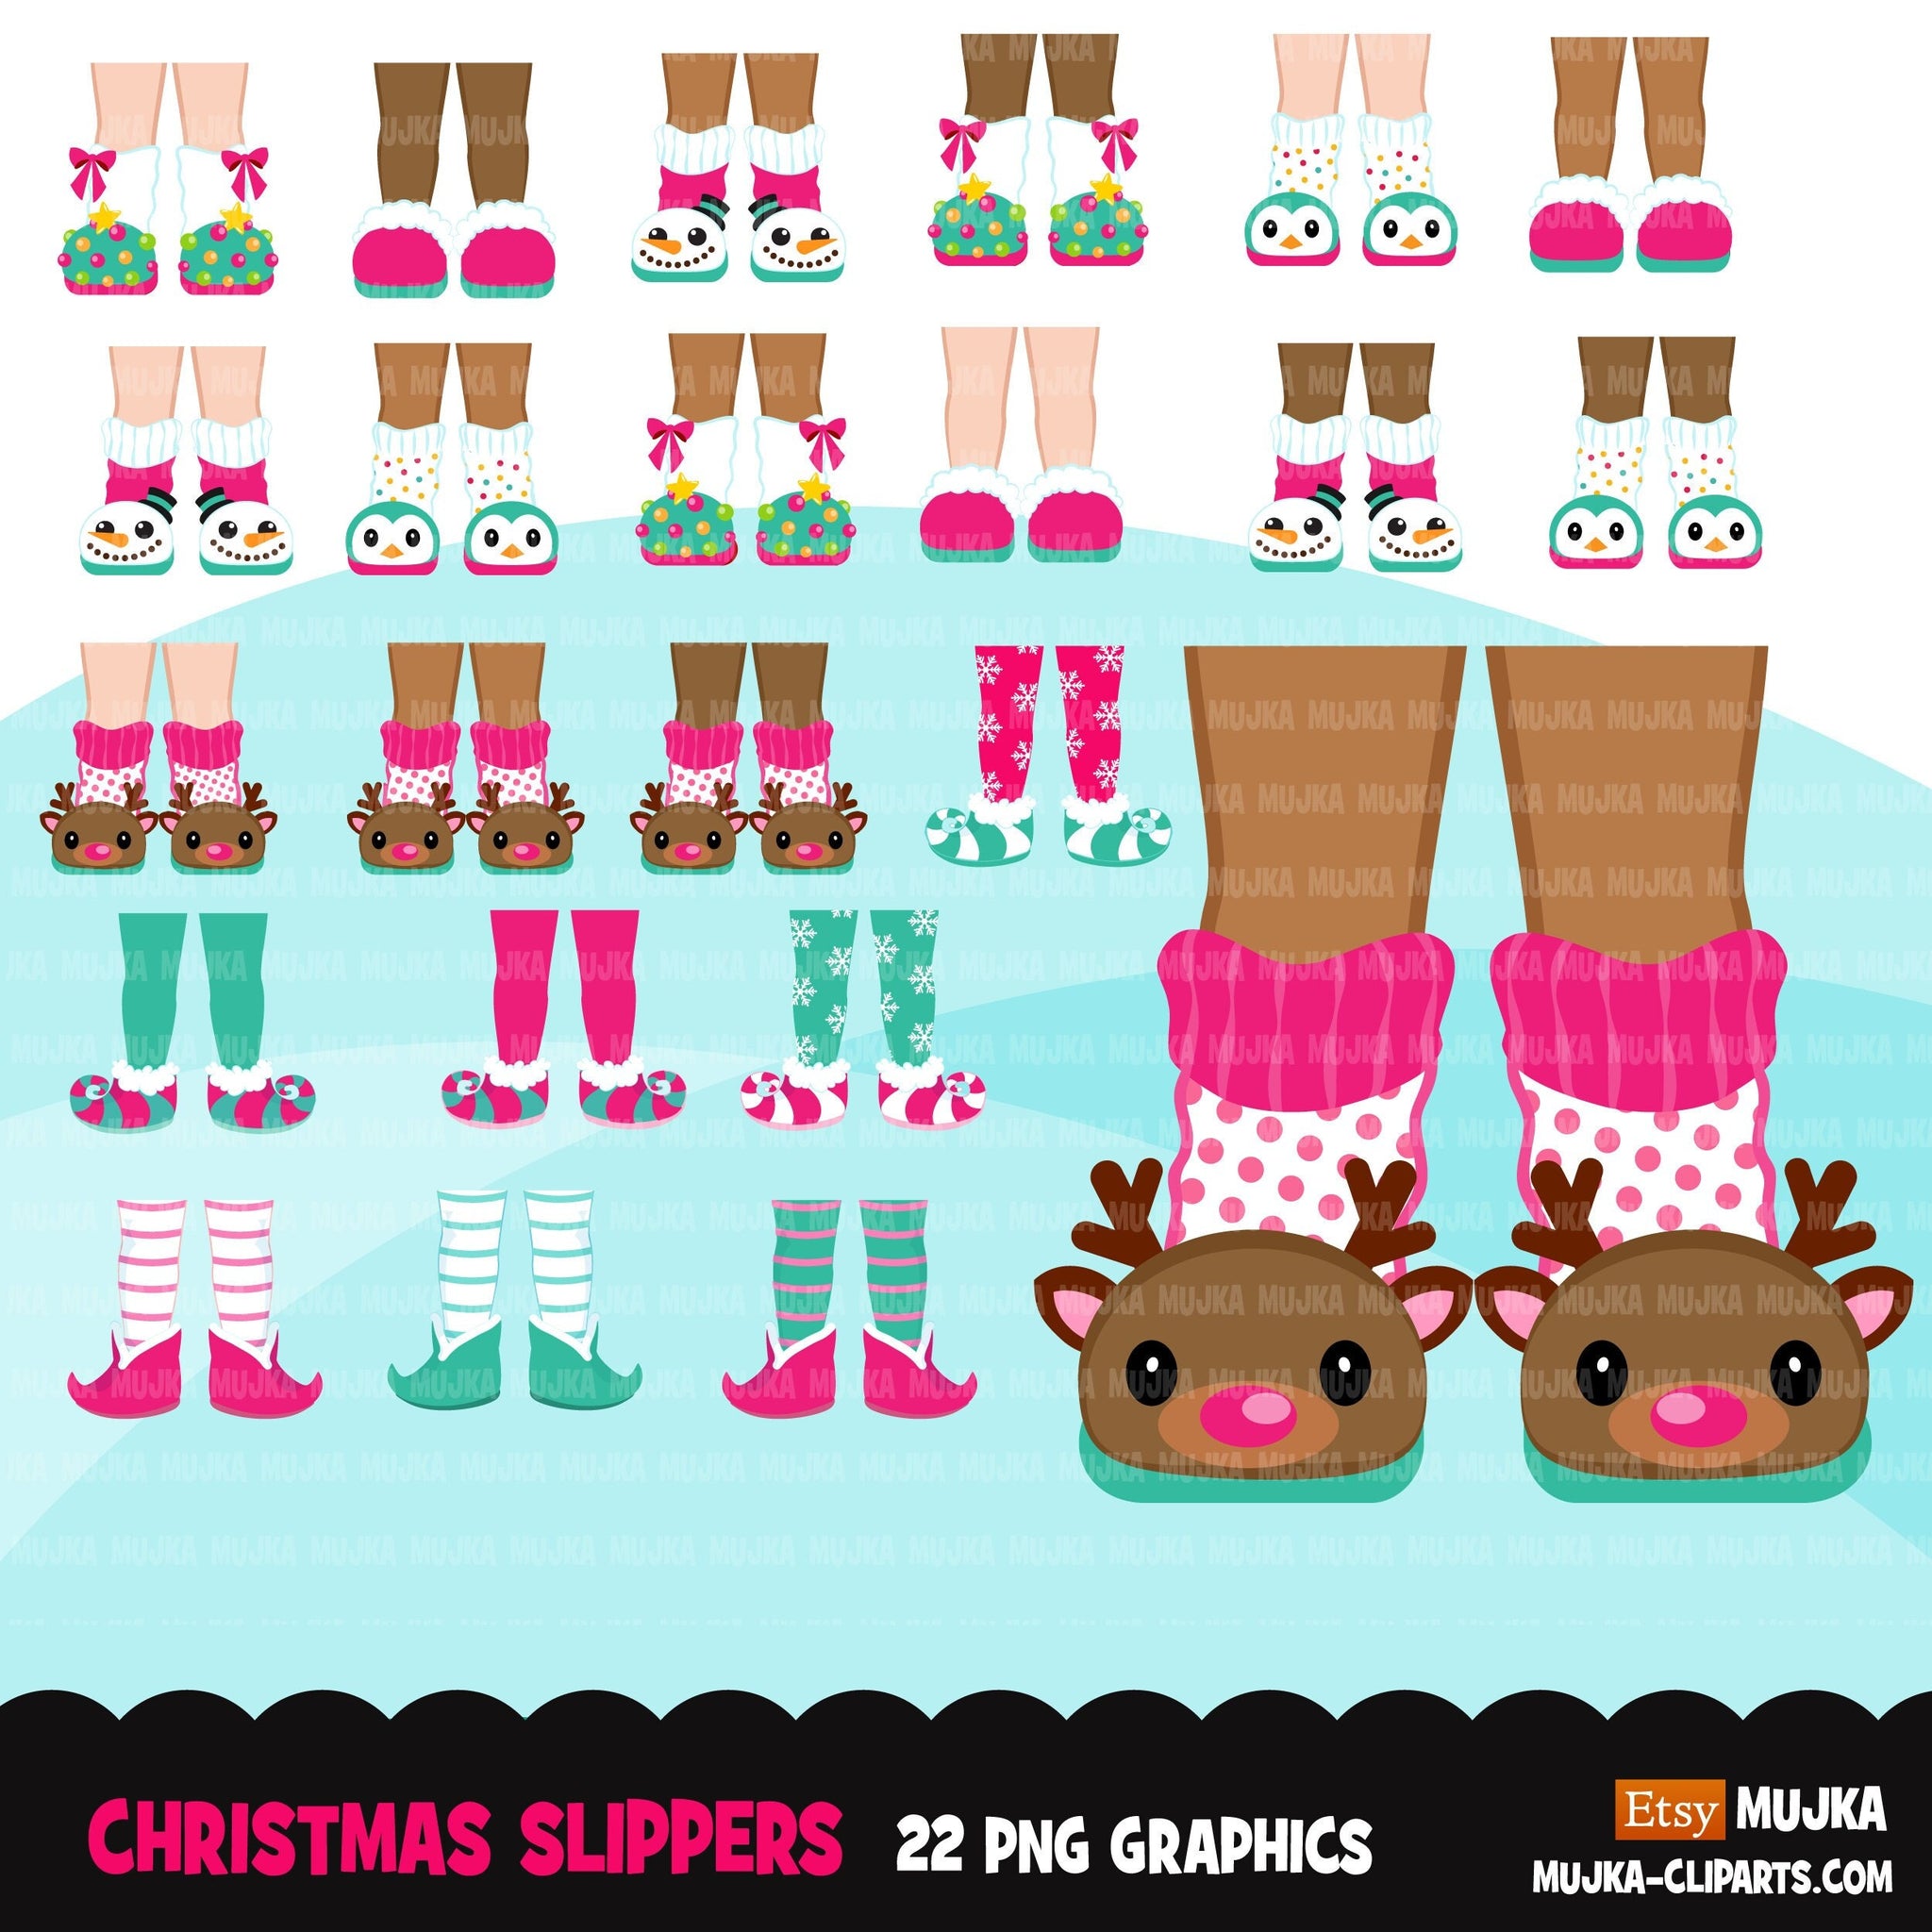 Christmas slippers clipart, Christmas shoes clipart, elf feet clipart, elf shoes clipart, pastel Christmas png, pink Christmas sublimation